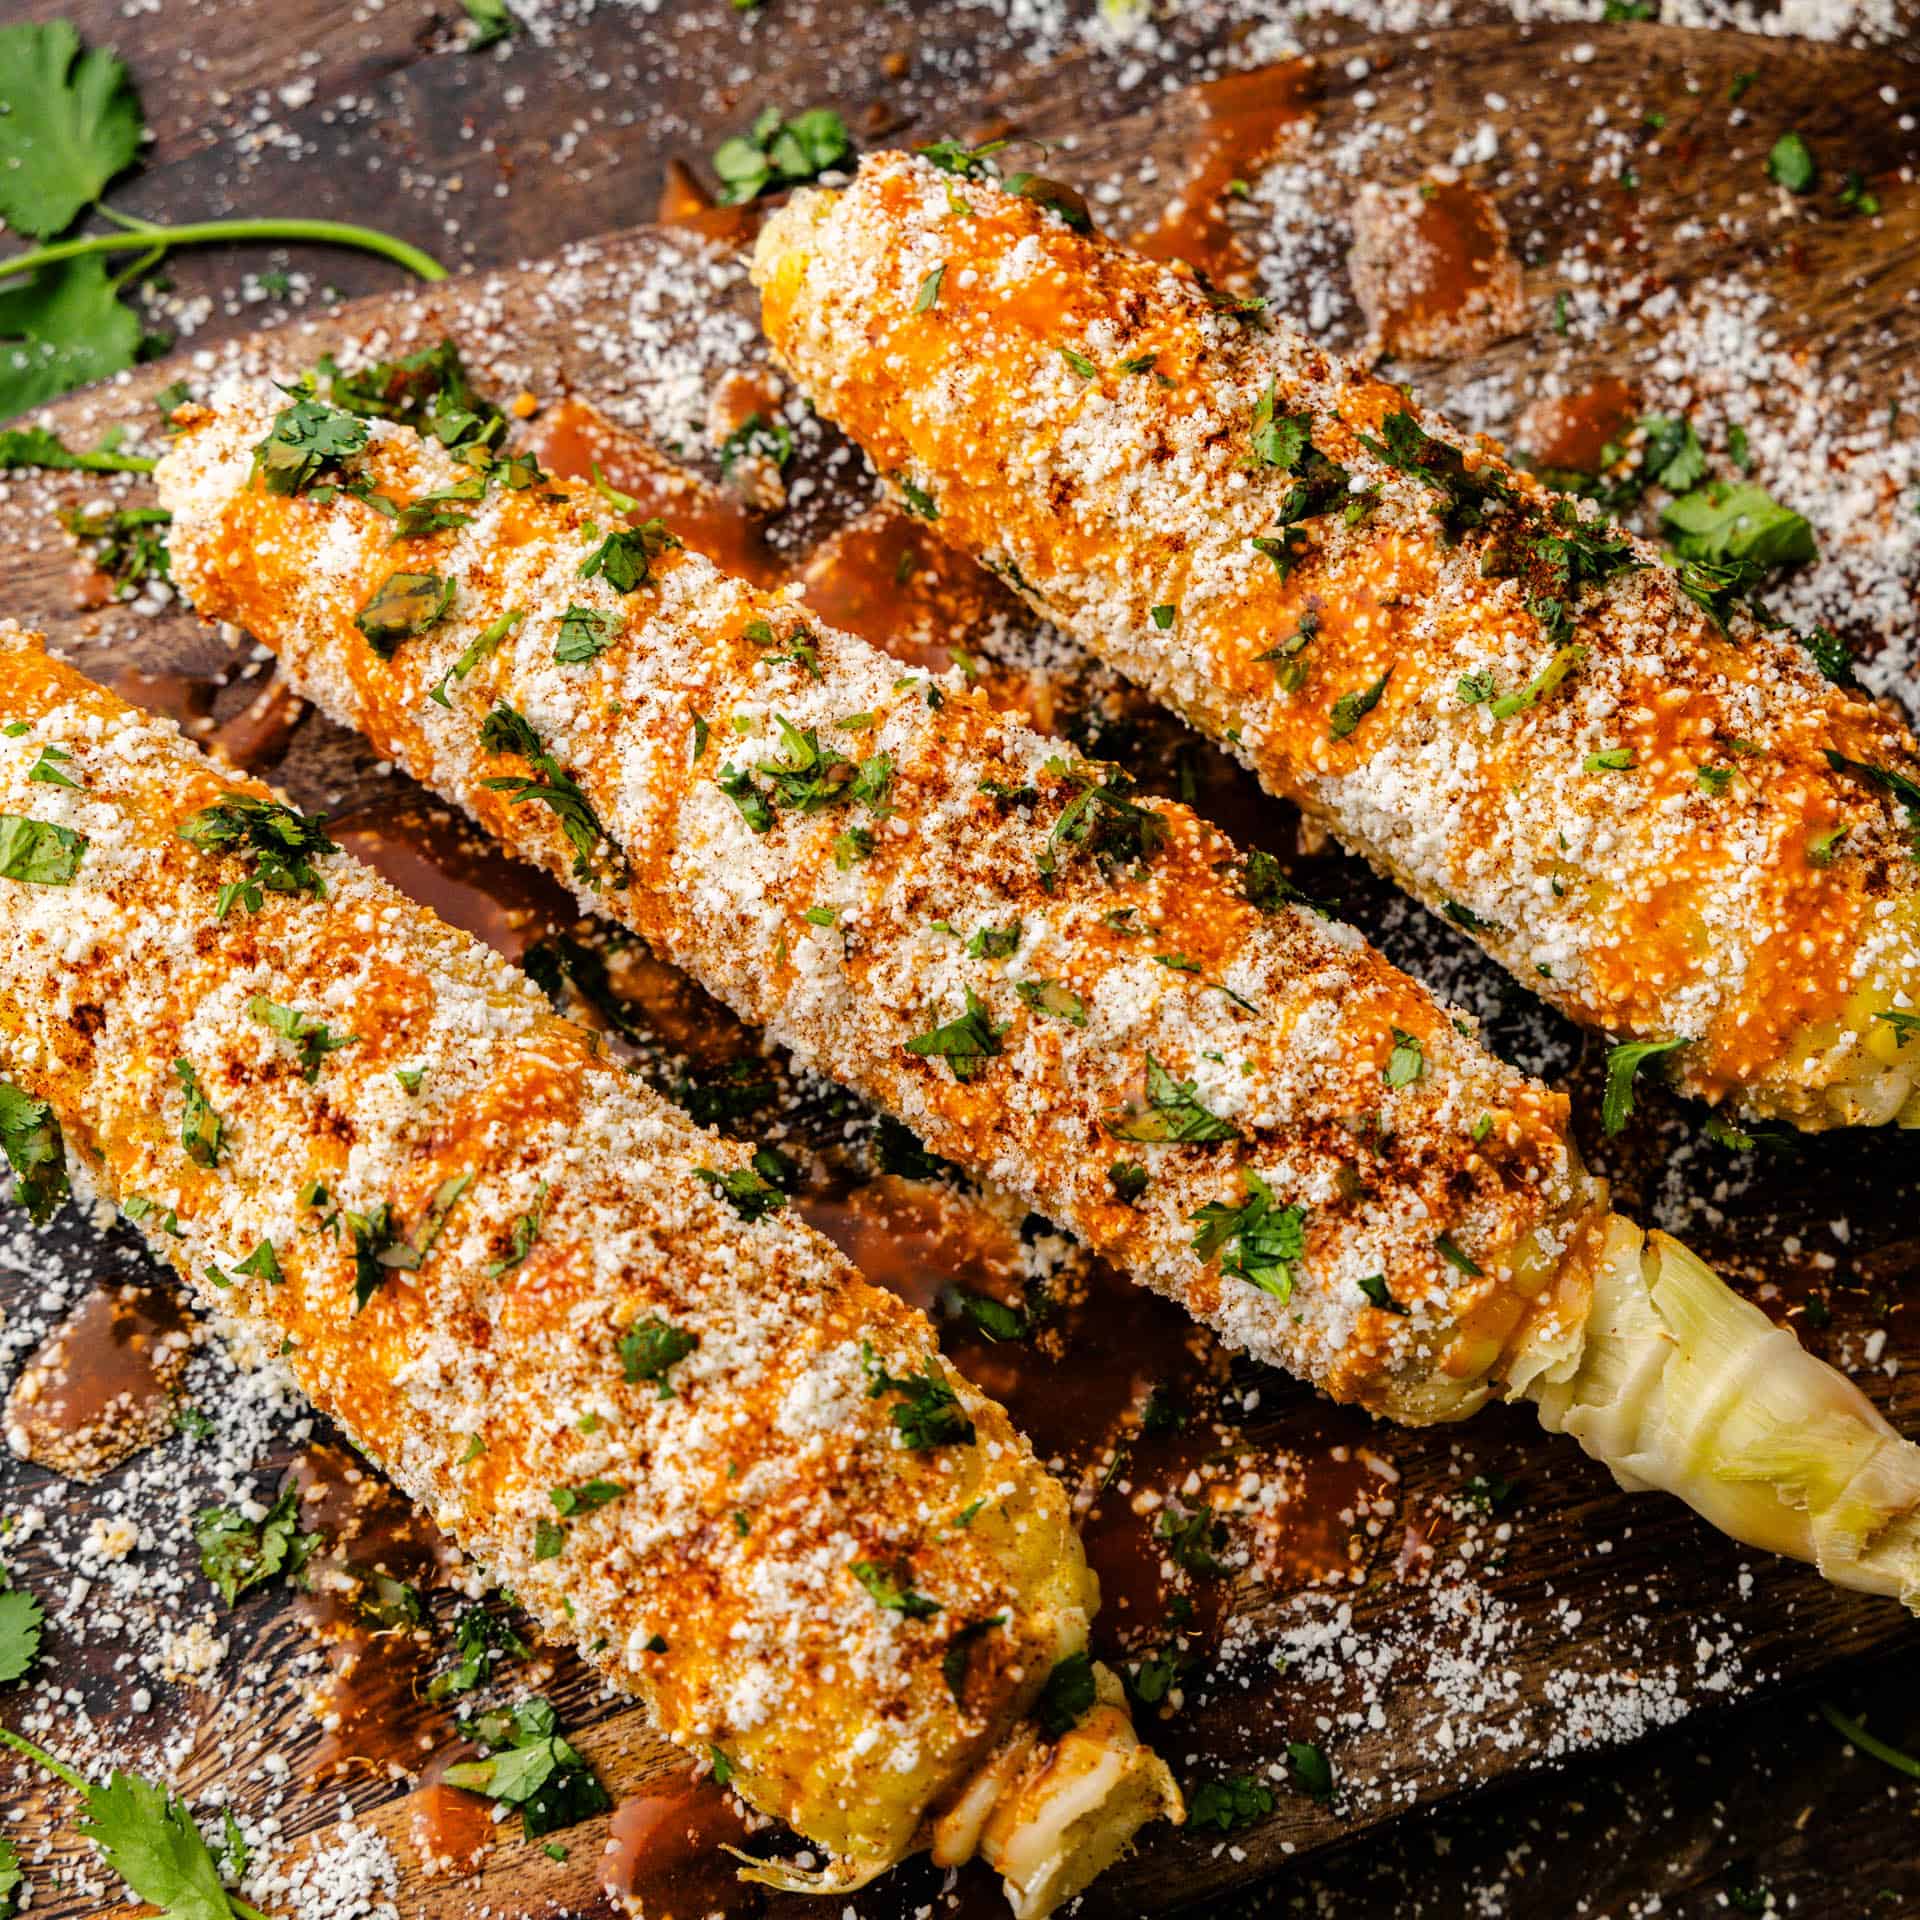 Delicious Mexican street corn laid out on a wooden tray.